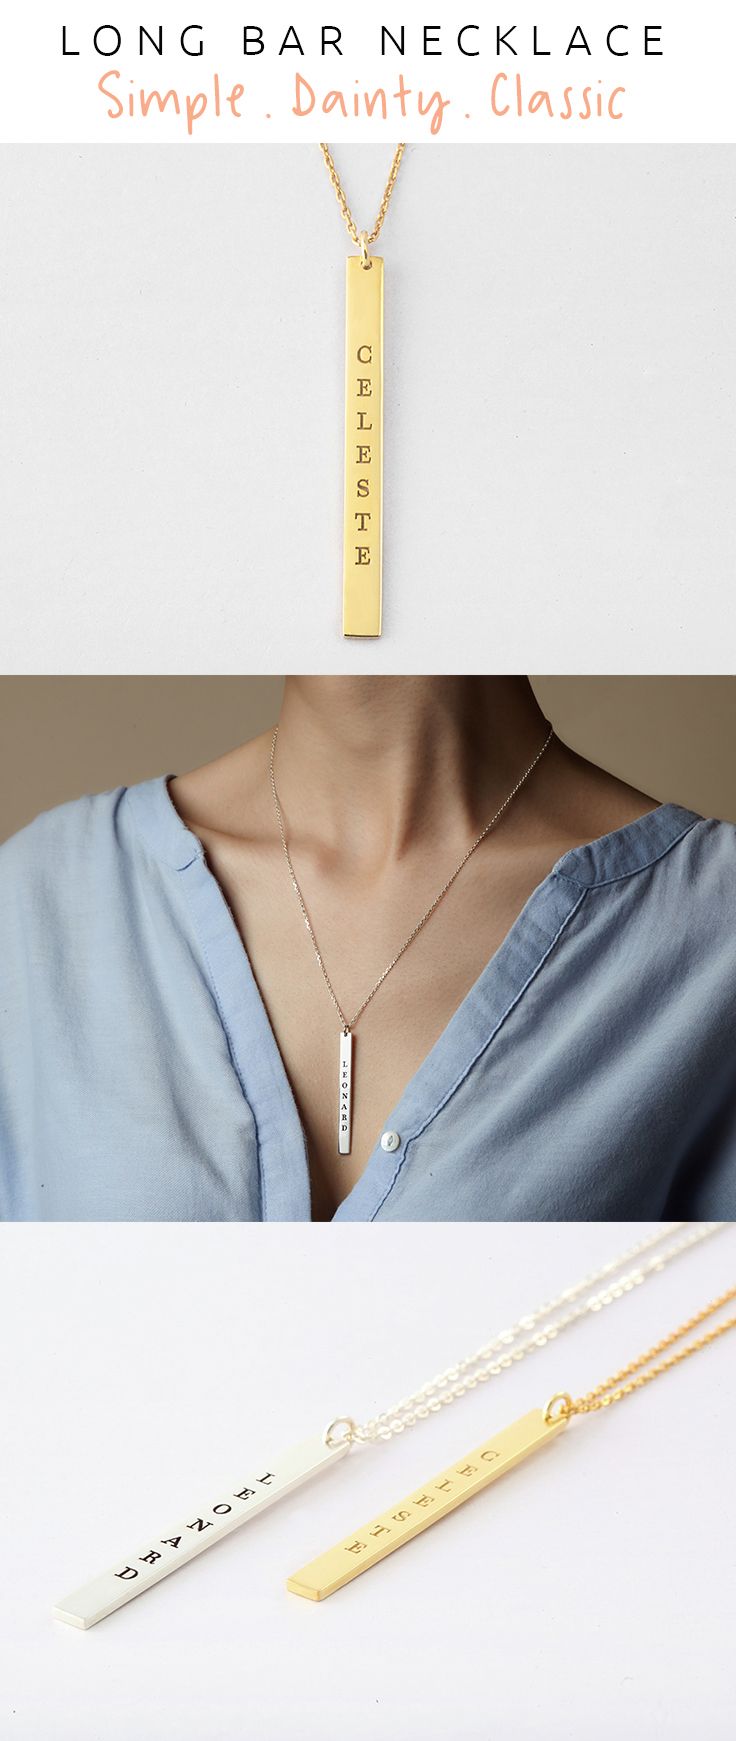 Personalised Gifts Ideas Drop Bar Name Necklace Personalized